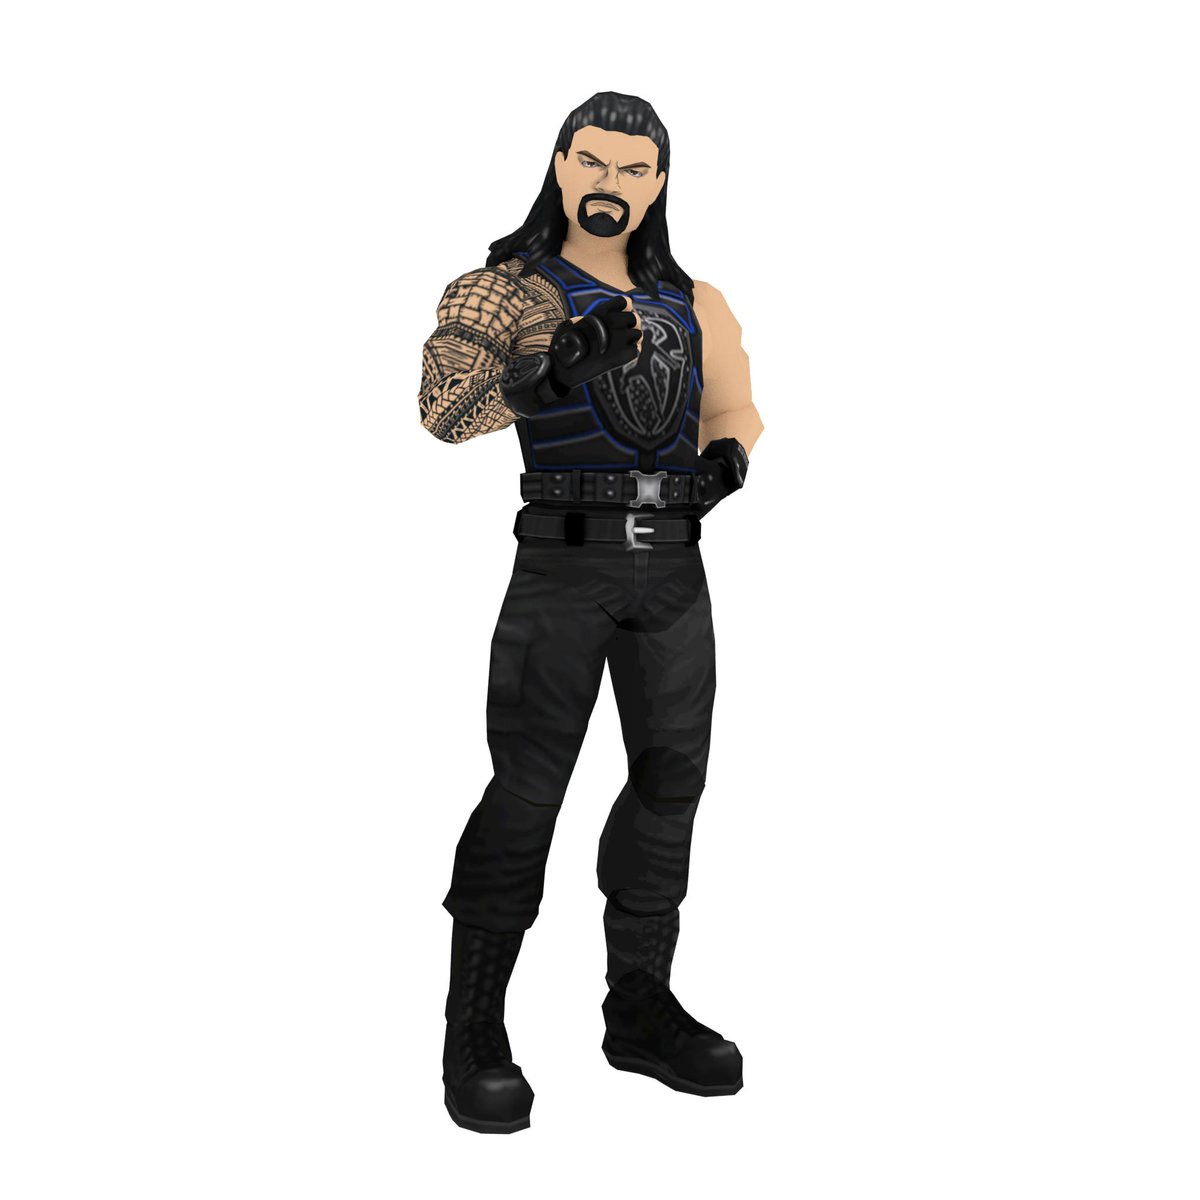 Wwe On Twitter It S Your Last Chance To Become Wweromanreigns